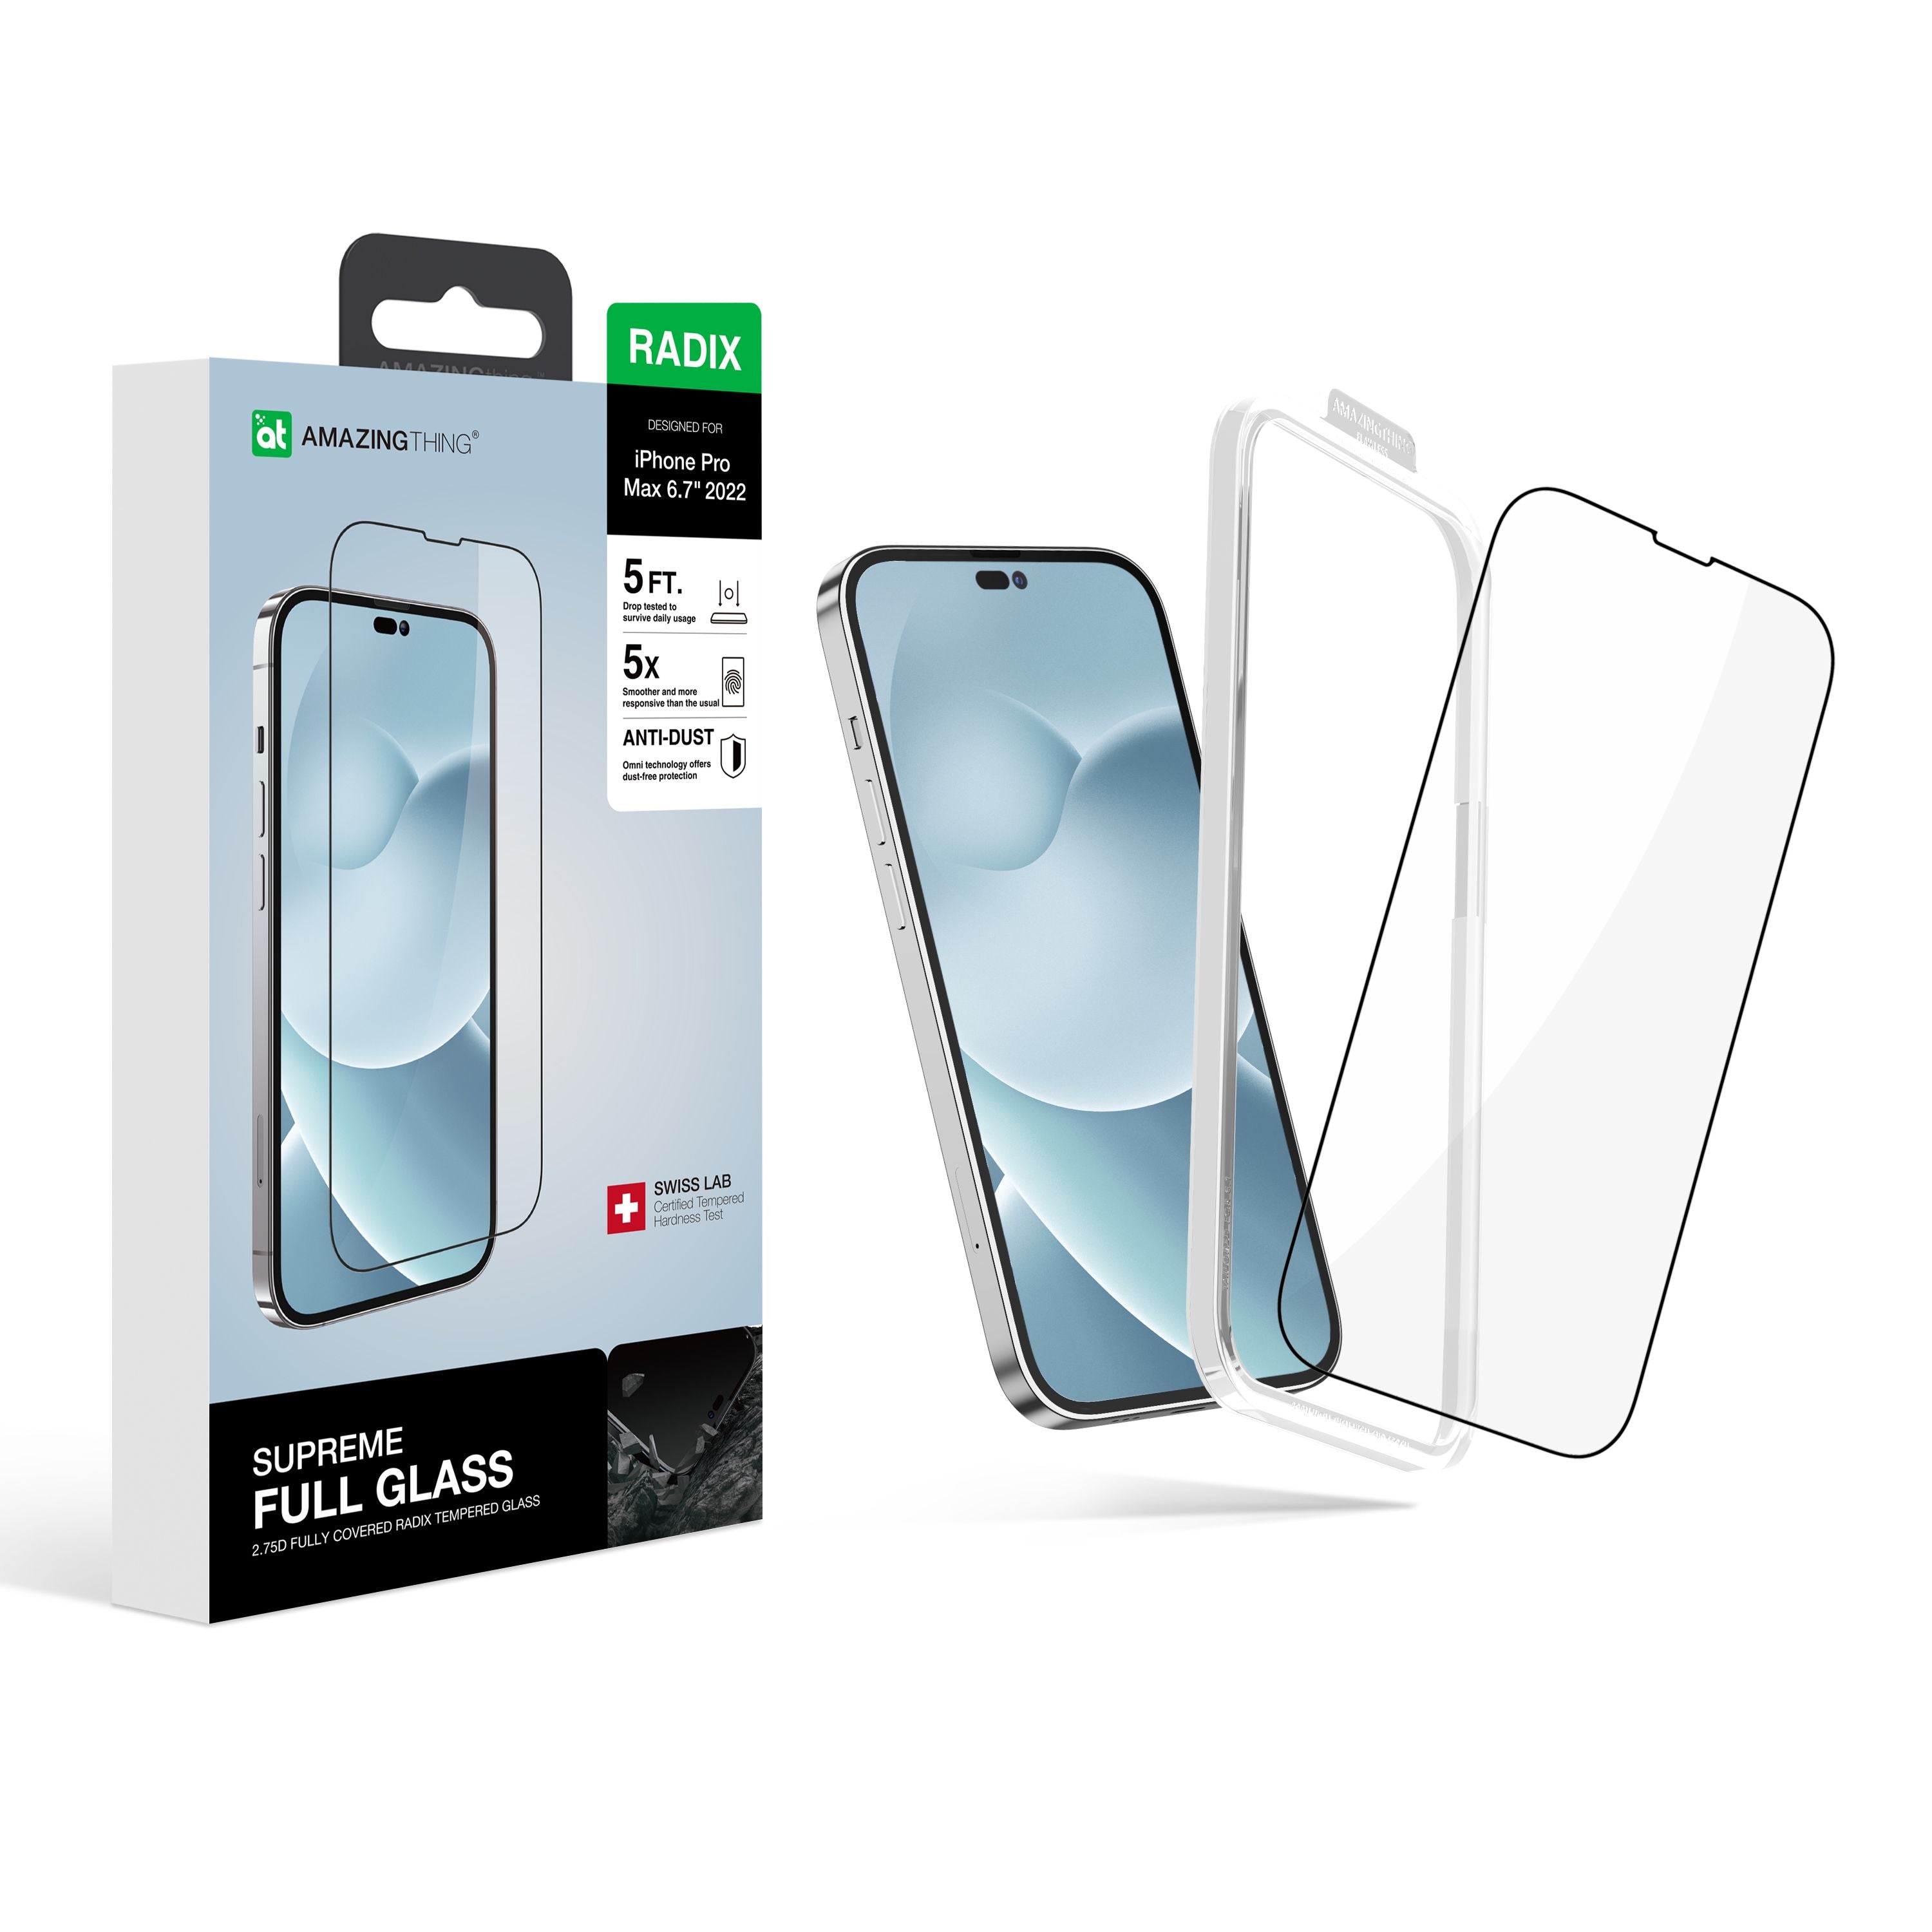 AMAZINGthing 2.7D Full Radix Glass Screen Protector for iPhone 14 6.7 Pro Max